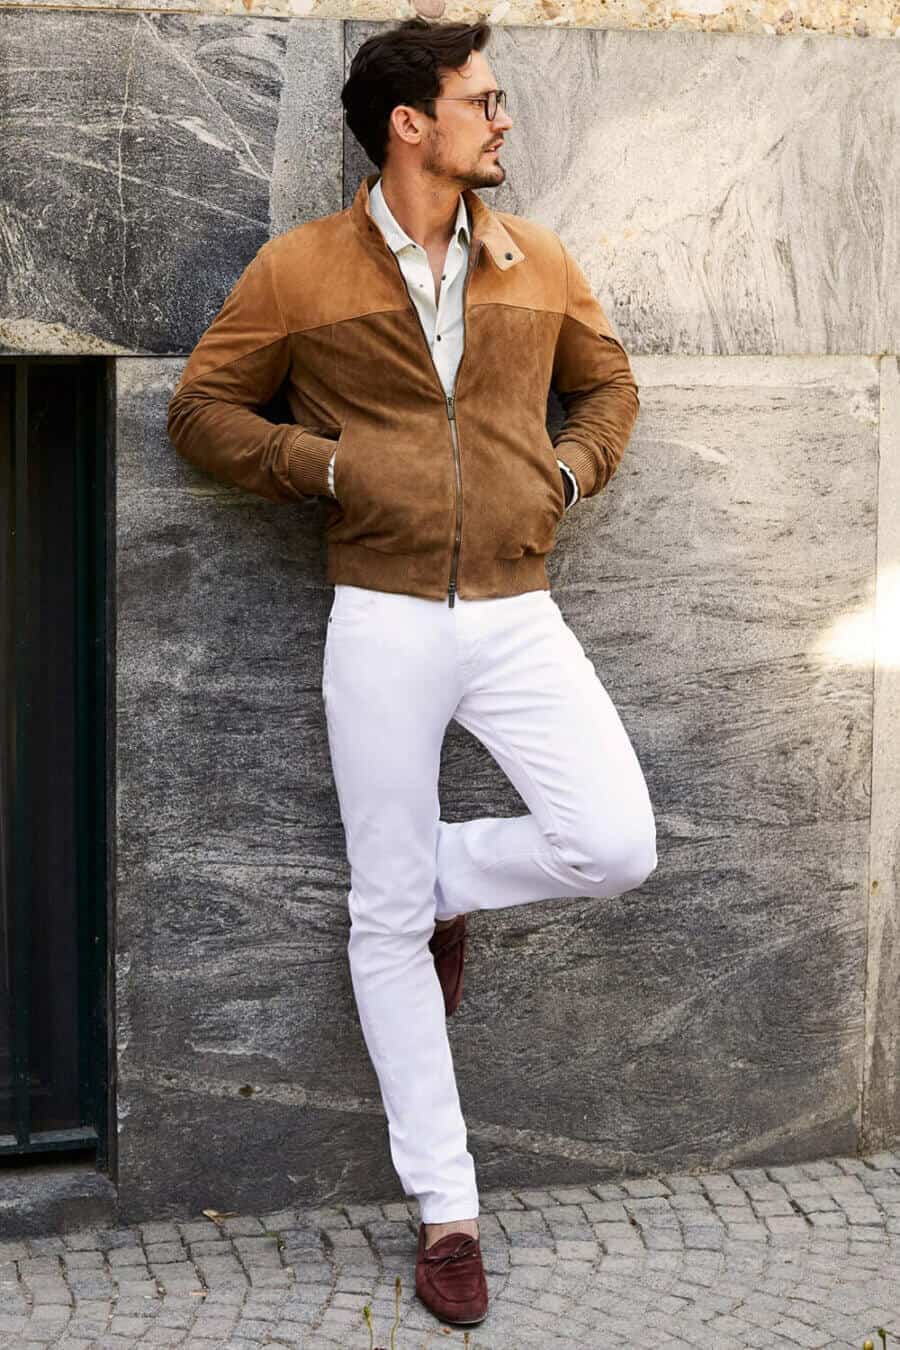 Men's white jeans, brown suede bomber jacket and driving shoes outfit